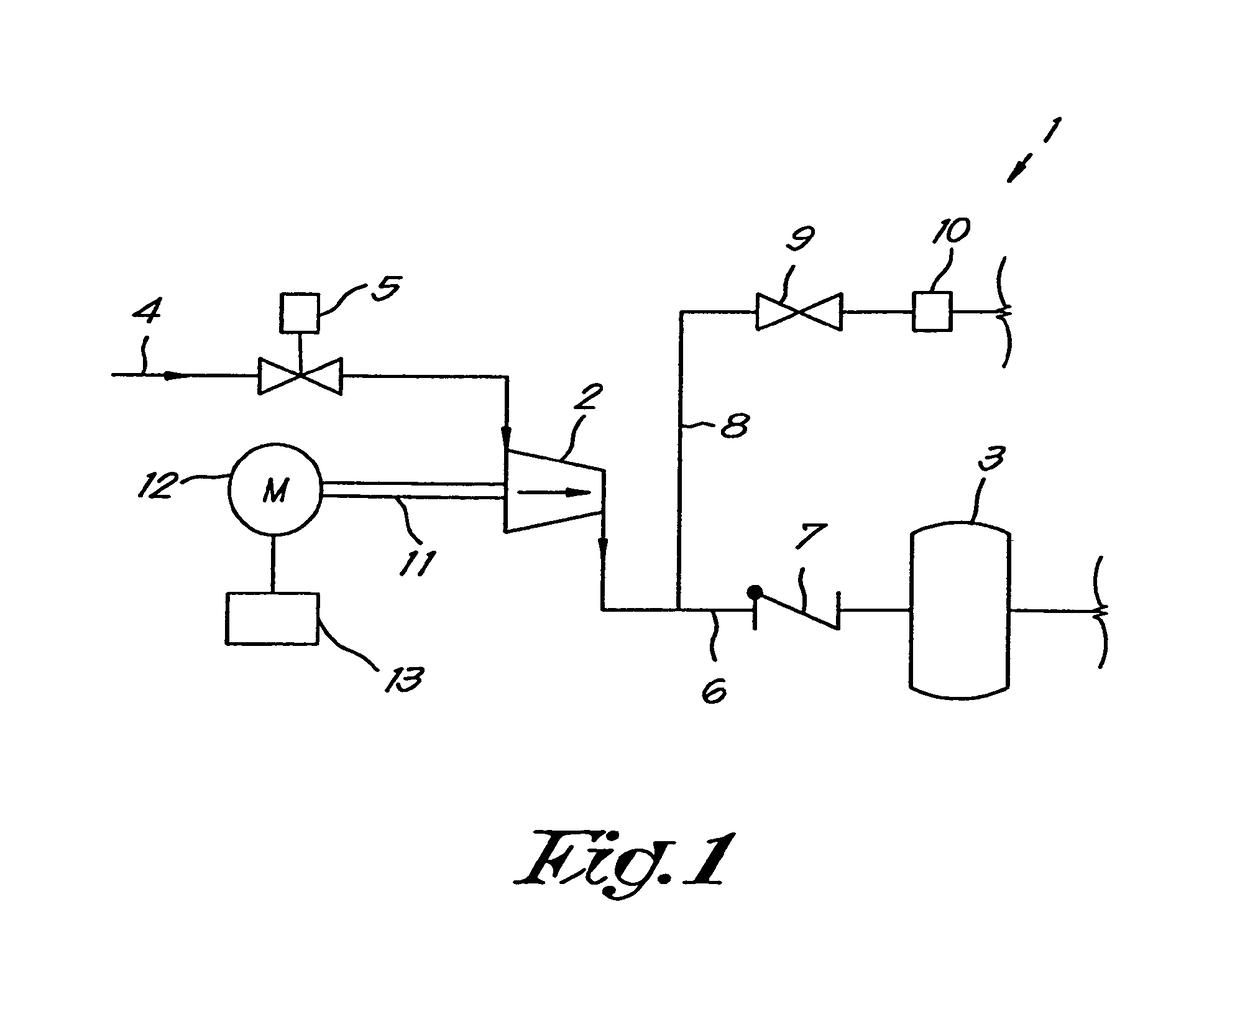 Method for controlling a compressor